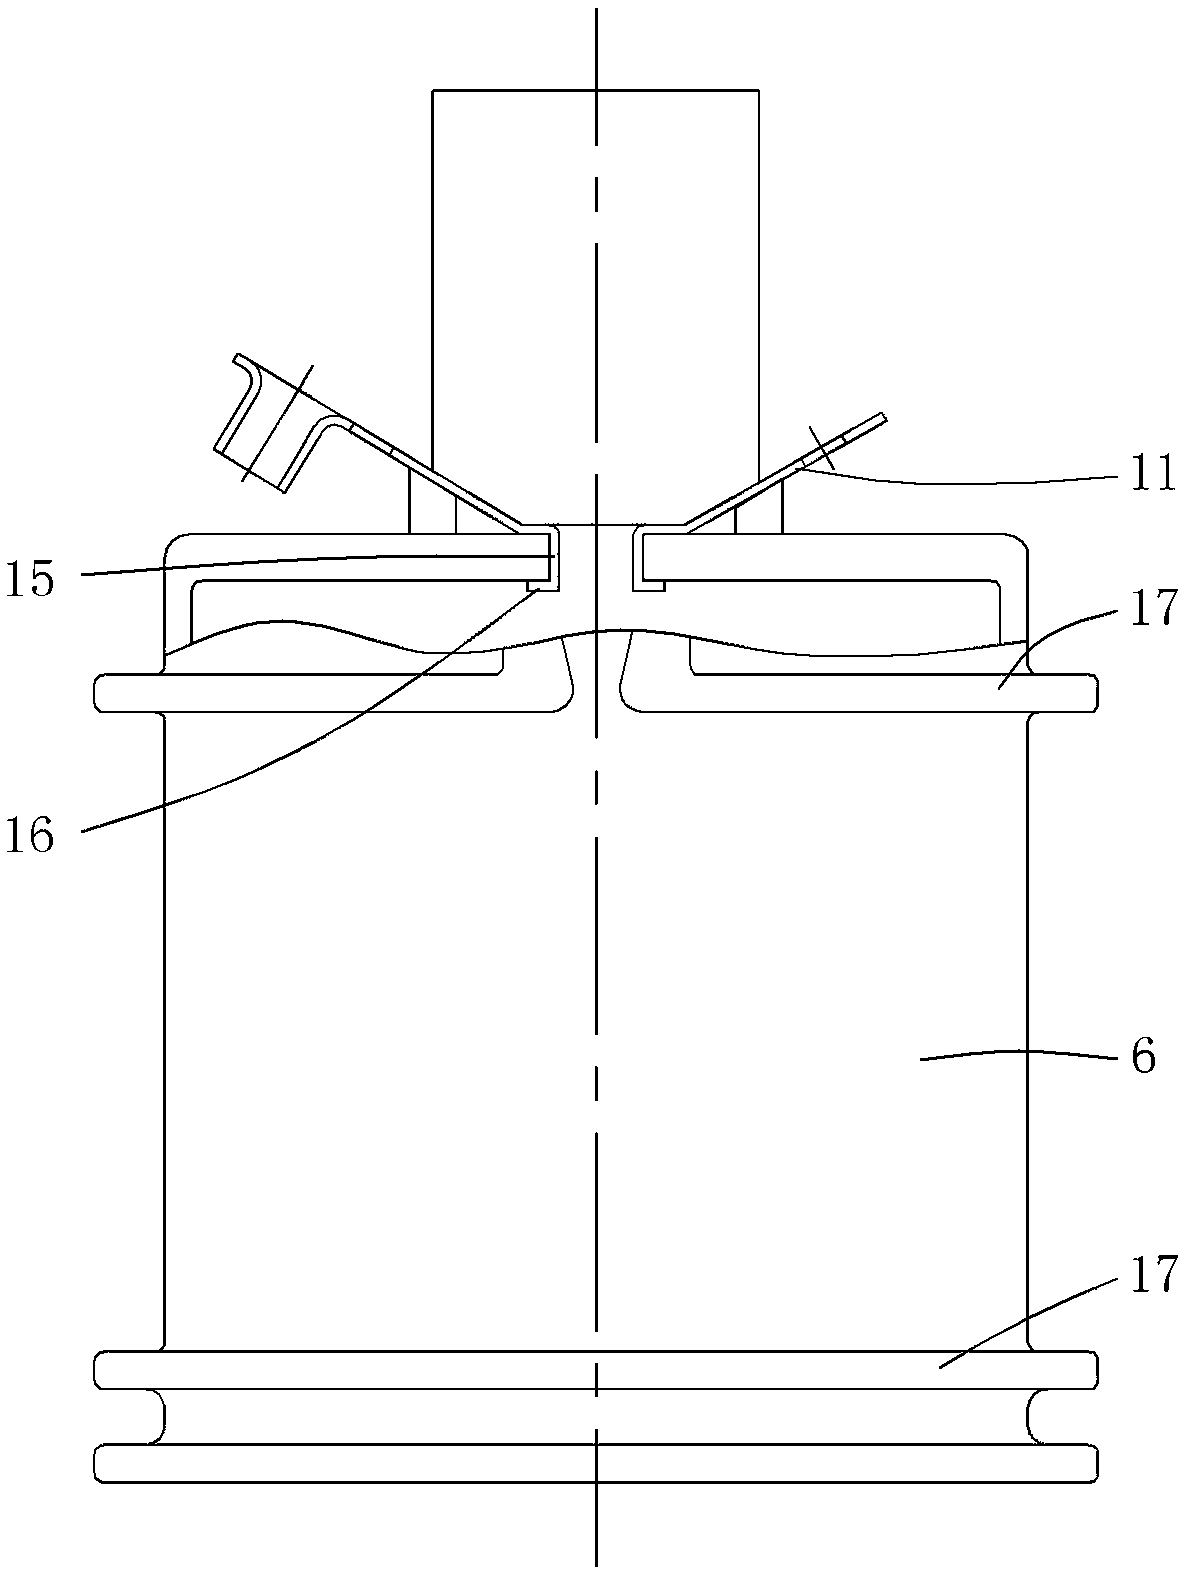 A support structure and a moving coil gas proportional valve with the support structure